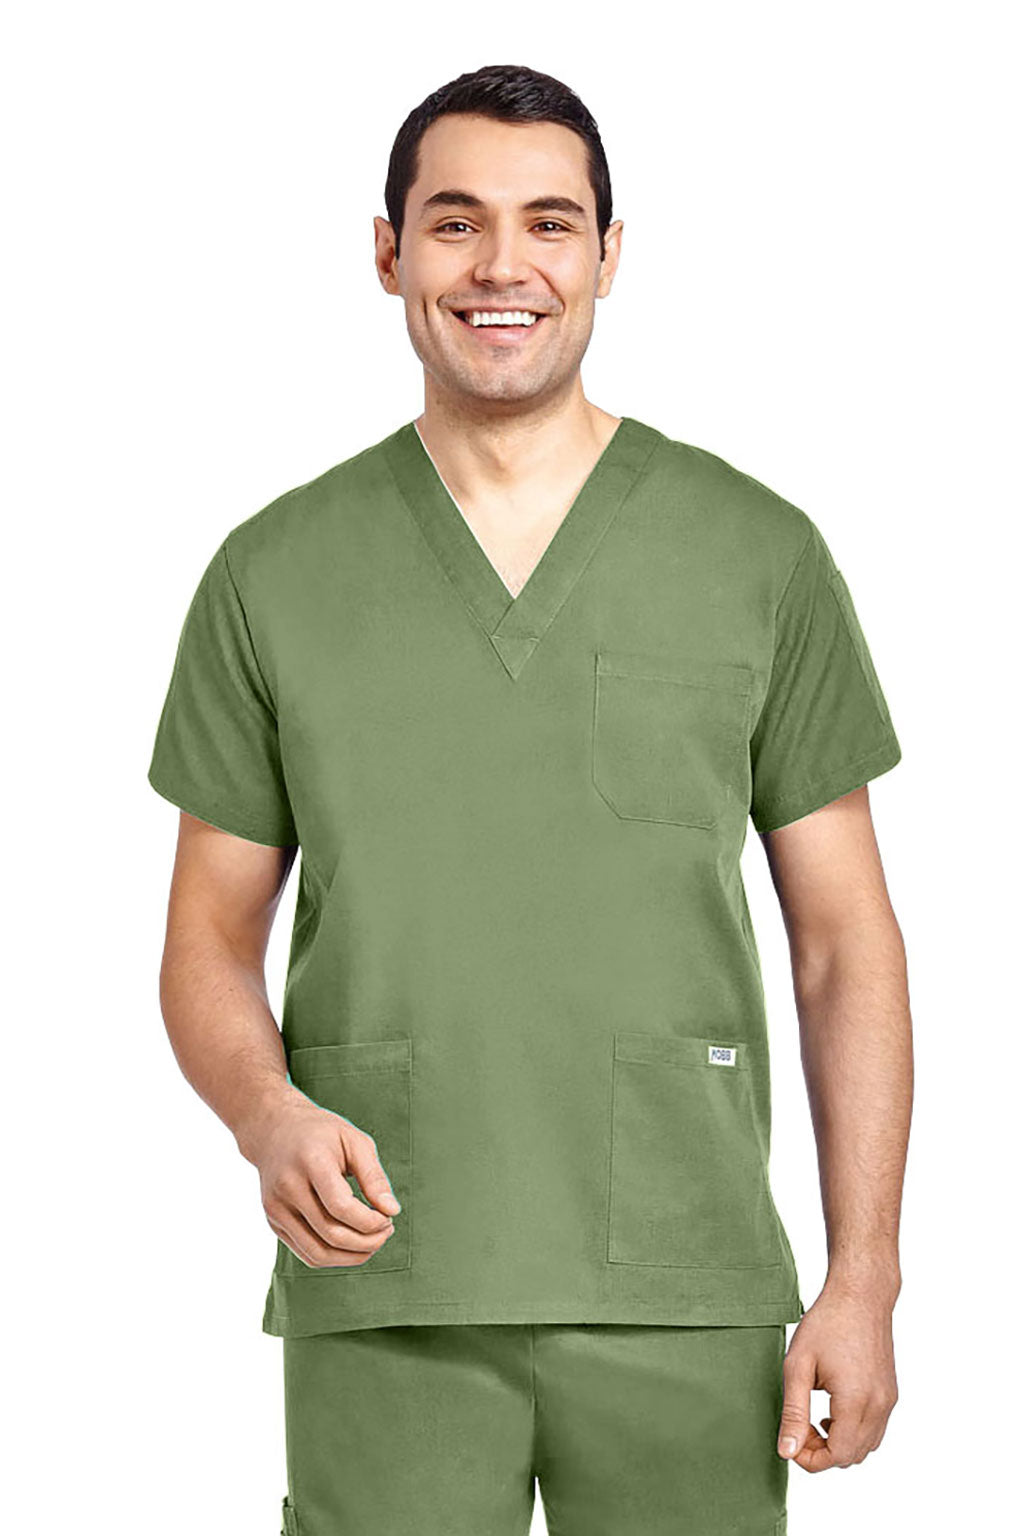 Product - Clearance Unisex V-Neck Mobb Scrub Top by MOBB